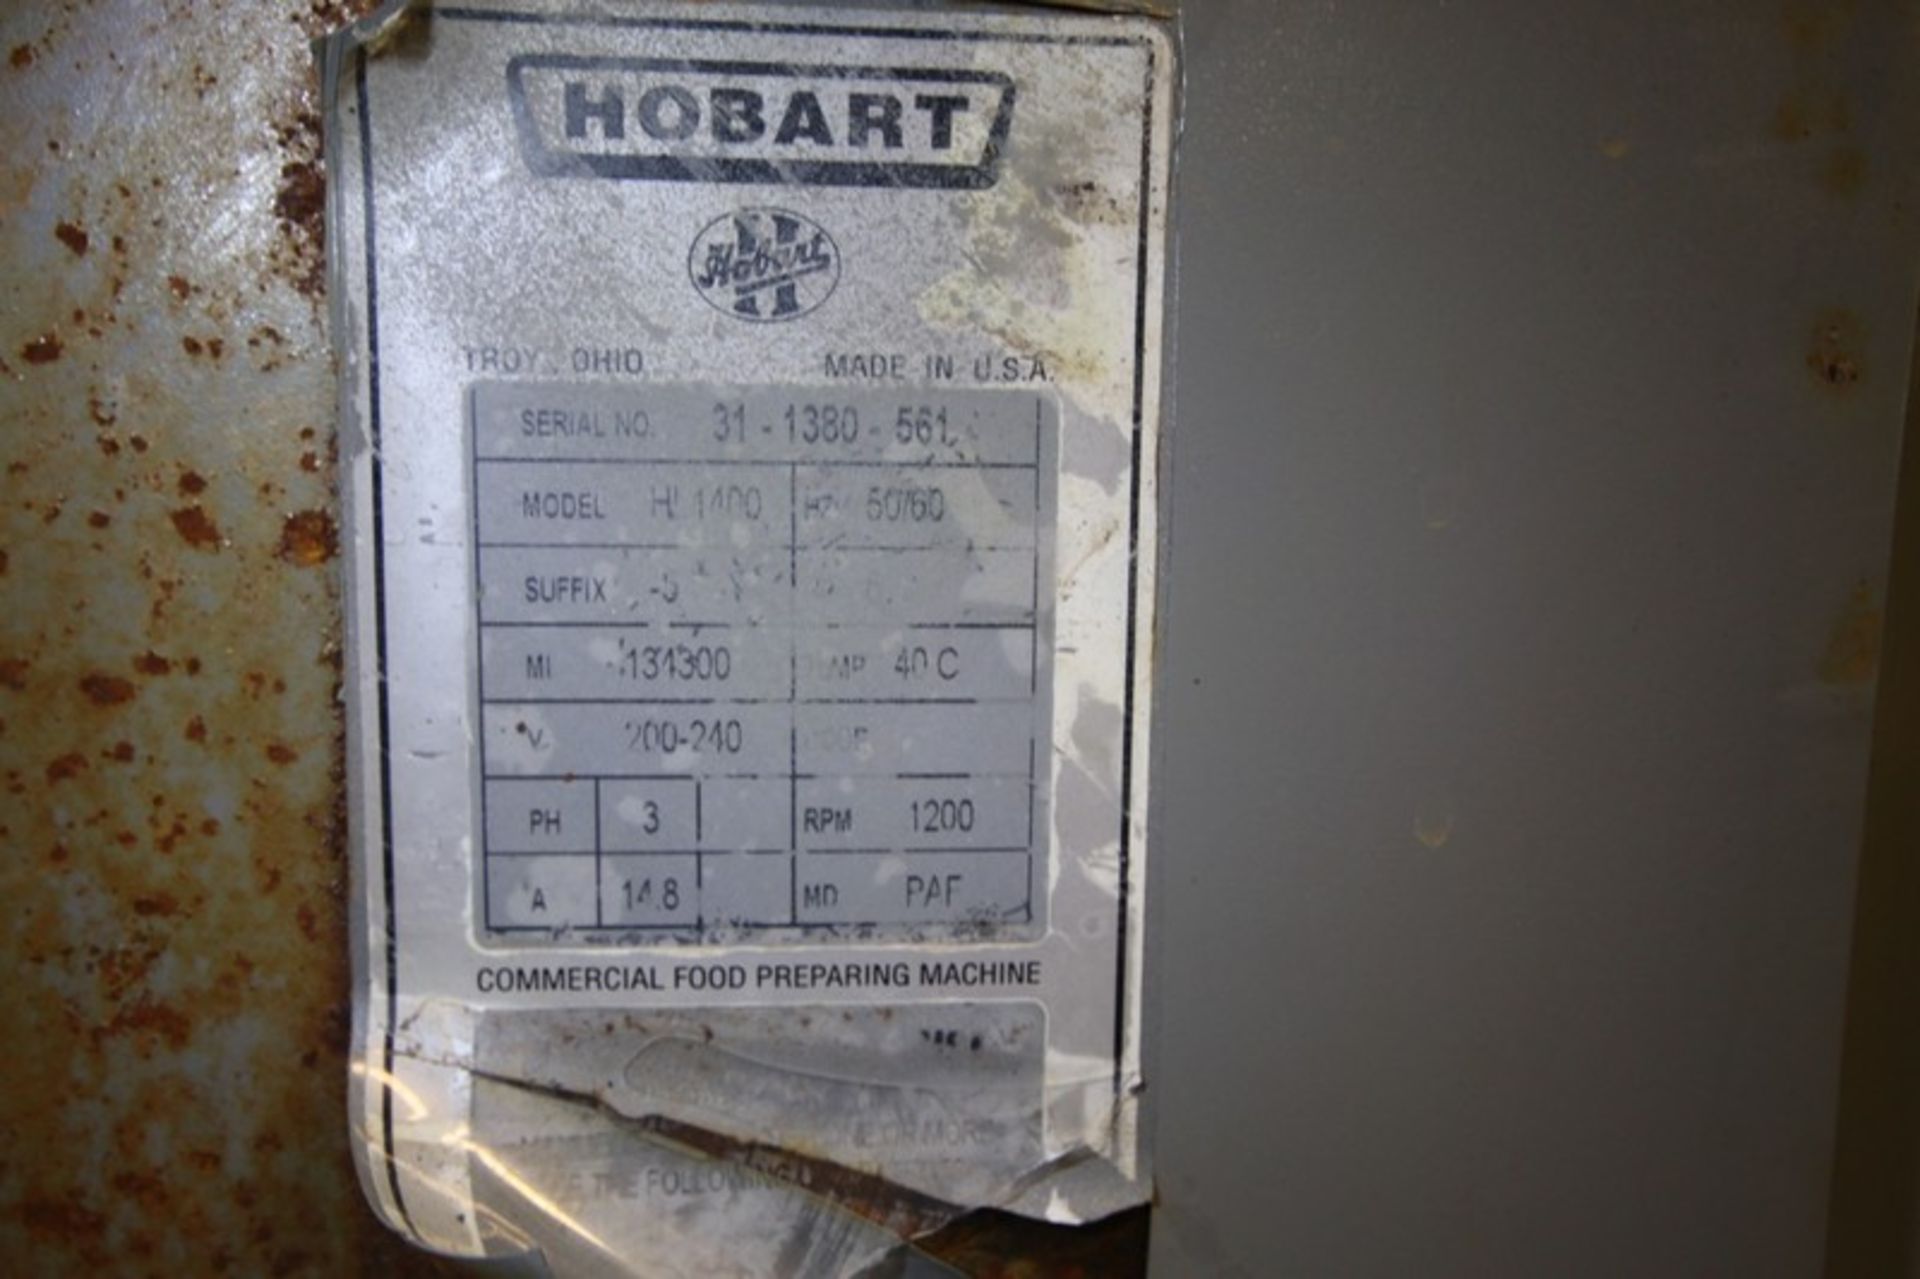 Hobart Vertical Mixer, Model H1400, SN 31-13-80-561, 200-240 3 Phase, with Digital Controls - Image 7 of 8